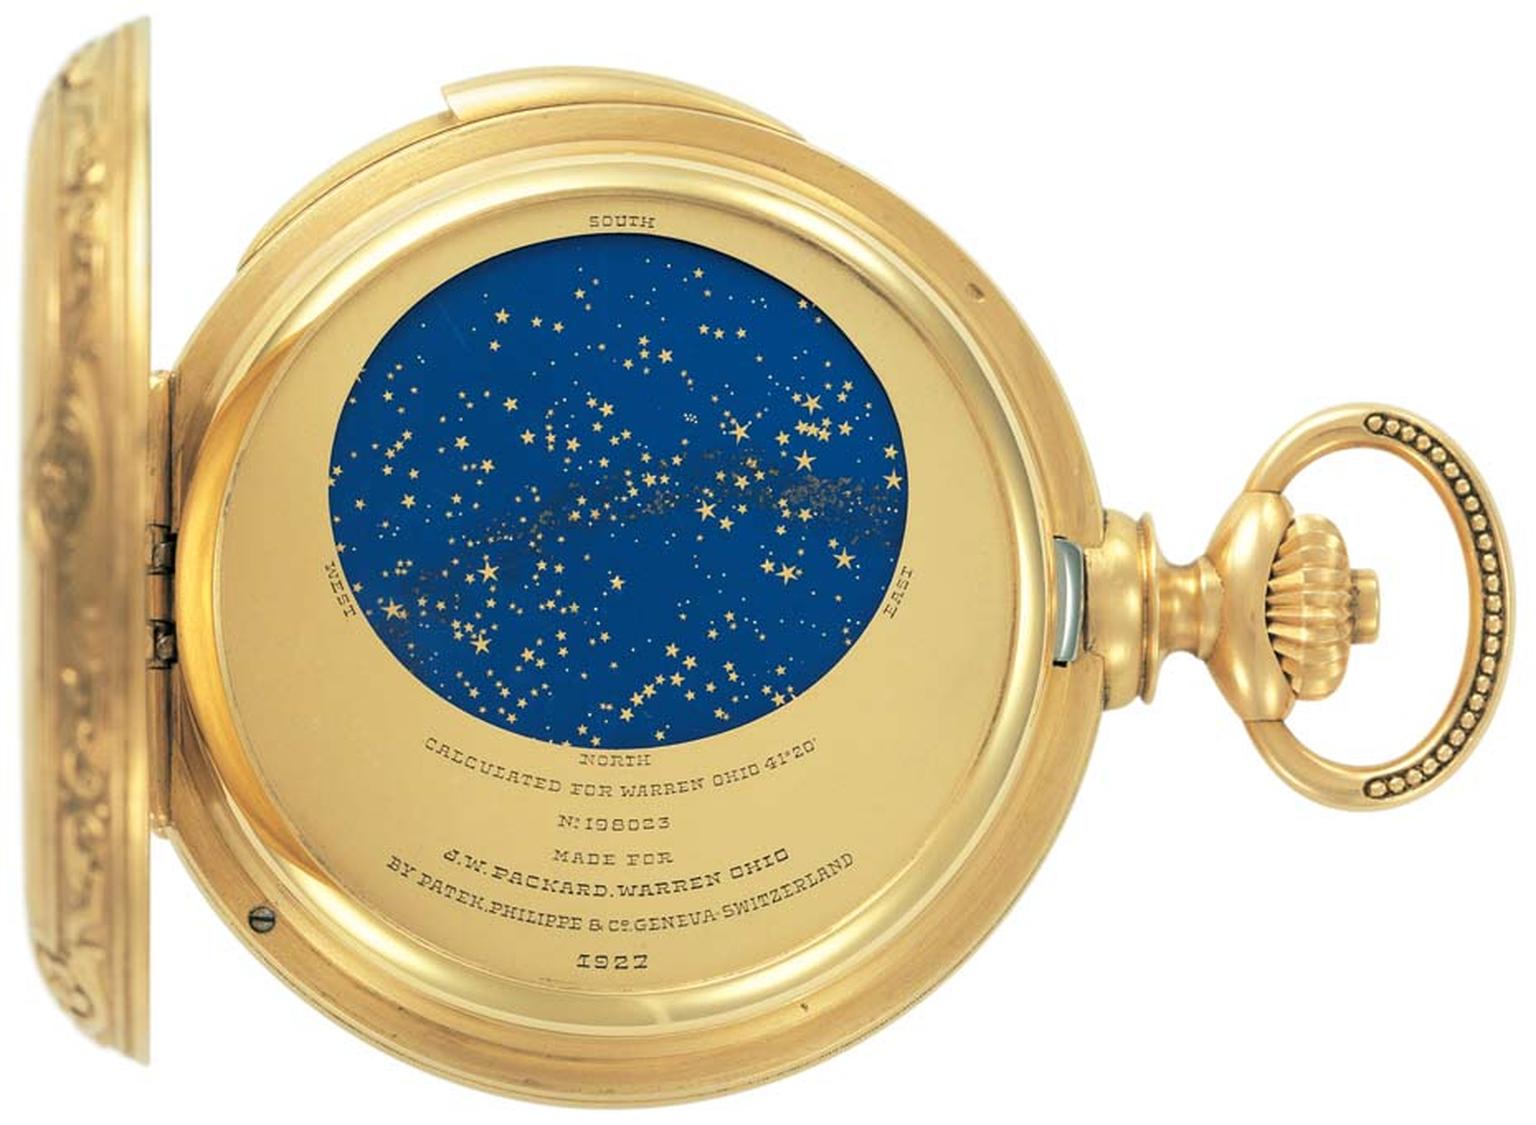 The Patek Philippe Grand Complication pocket watch made for James Ward Packard features a representation of the night sky over Packard's hometown of Warren, Ohio.